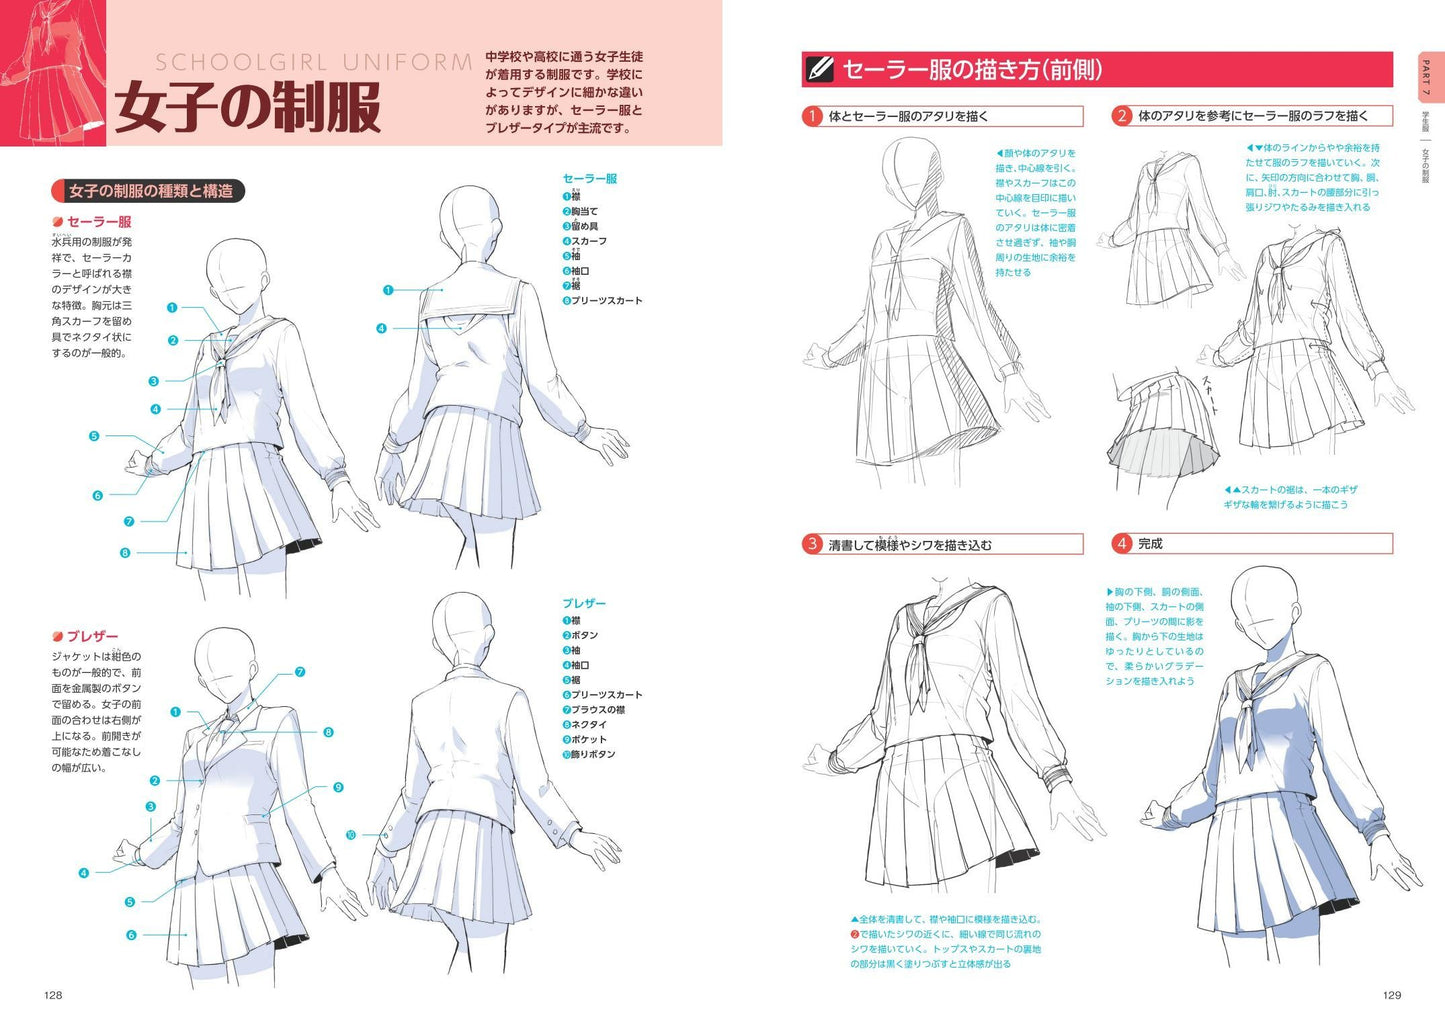 Digital Illustration "How To Draw Clothes" Encyclopedia